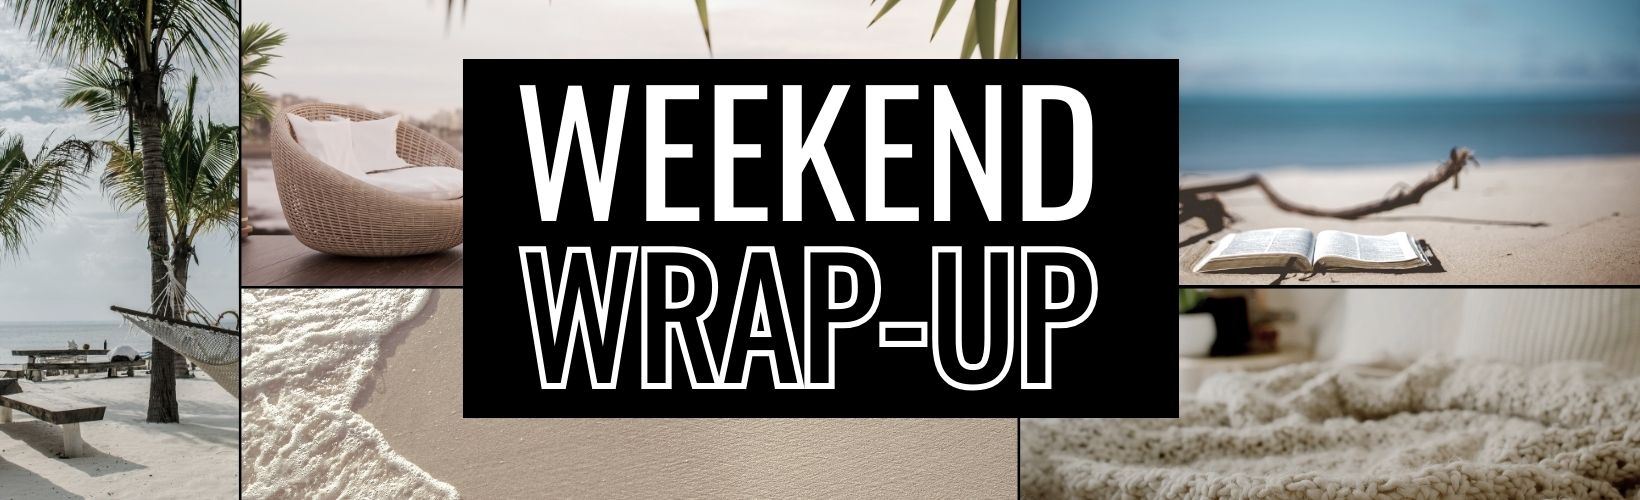 Weekend Wrap-Up: How to Overcome Anxiety and Find Peace in Life